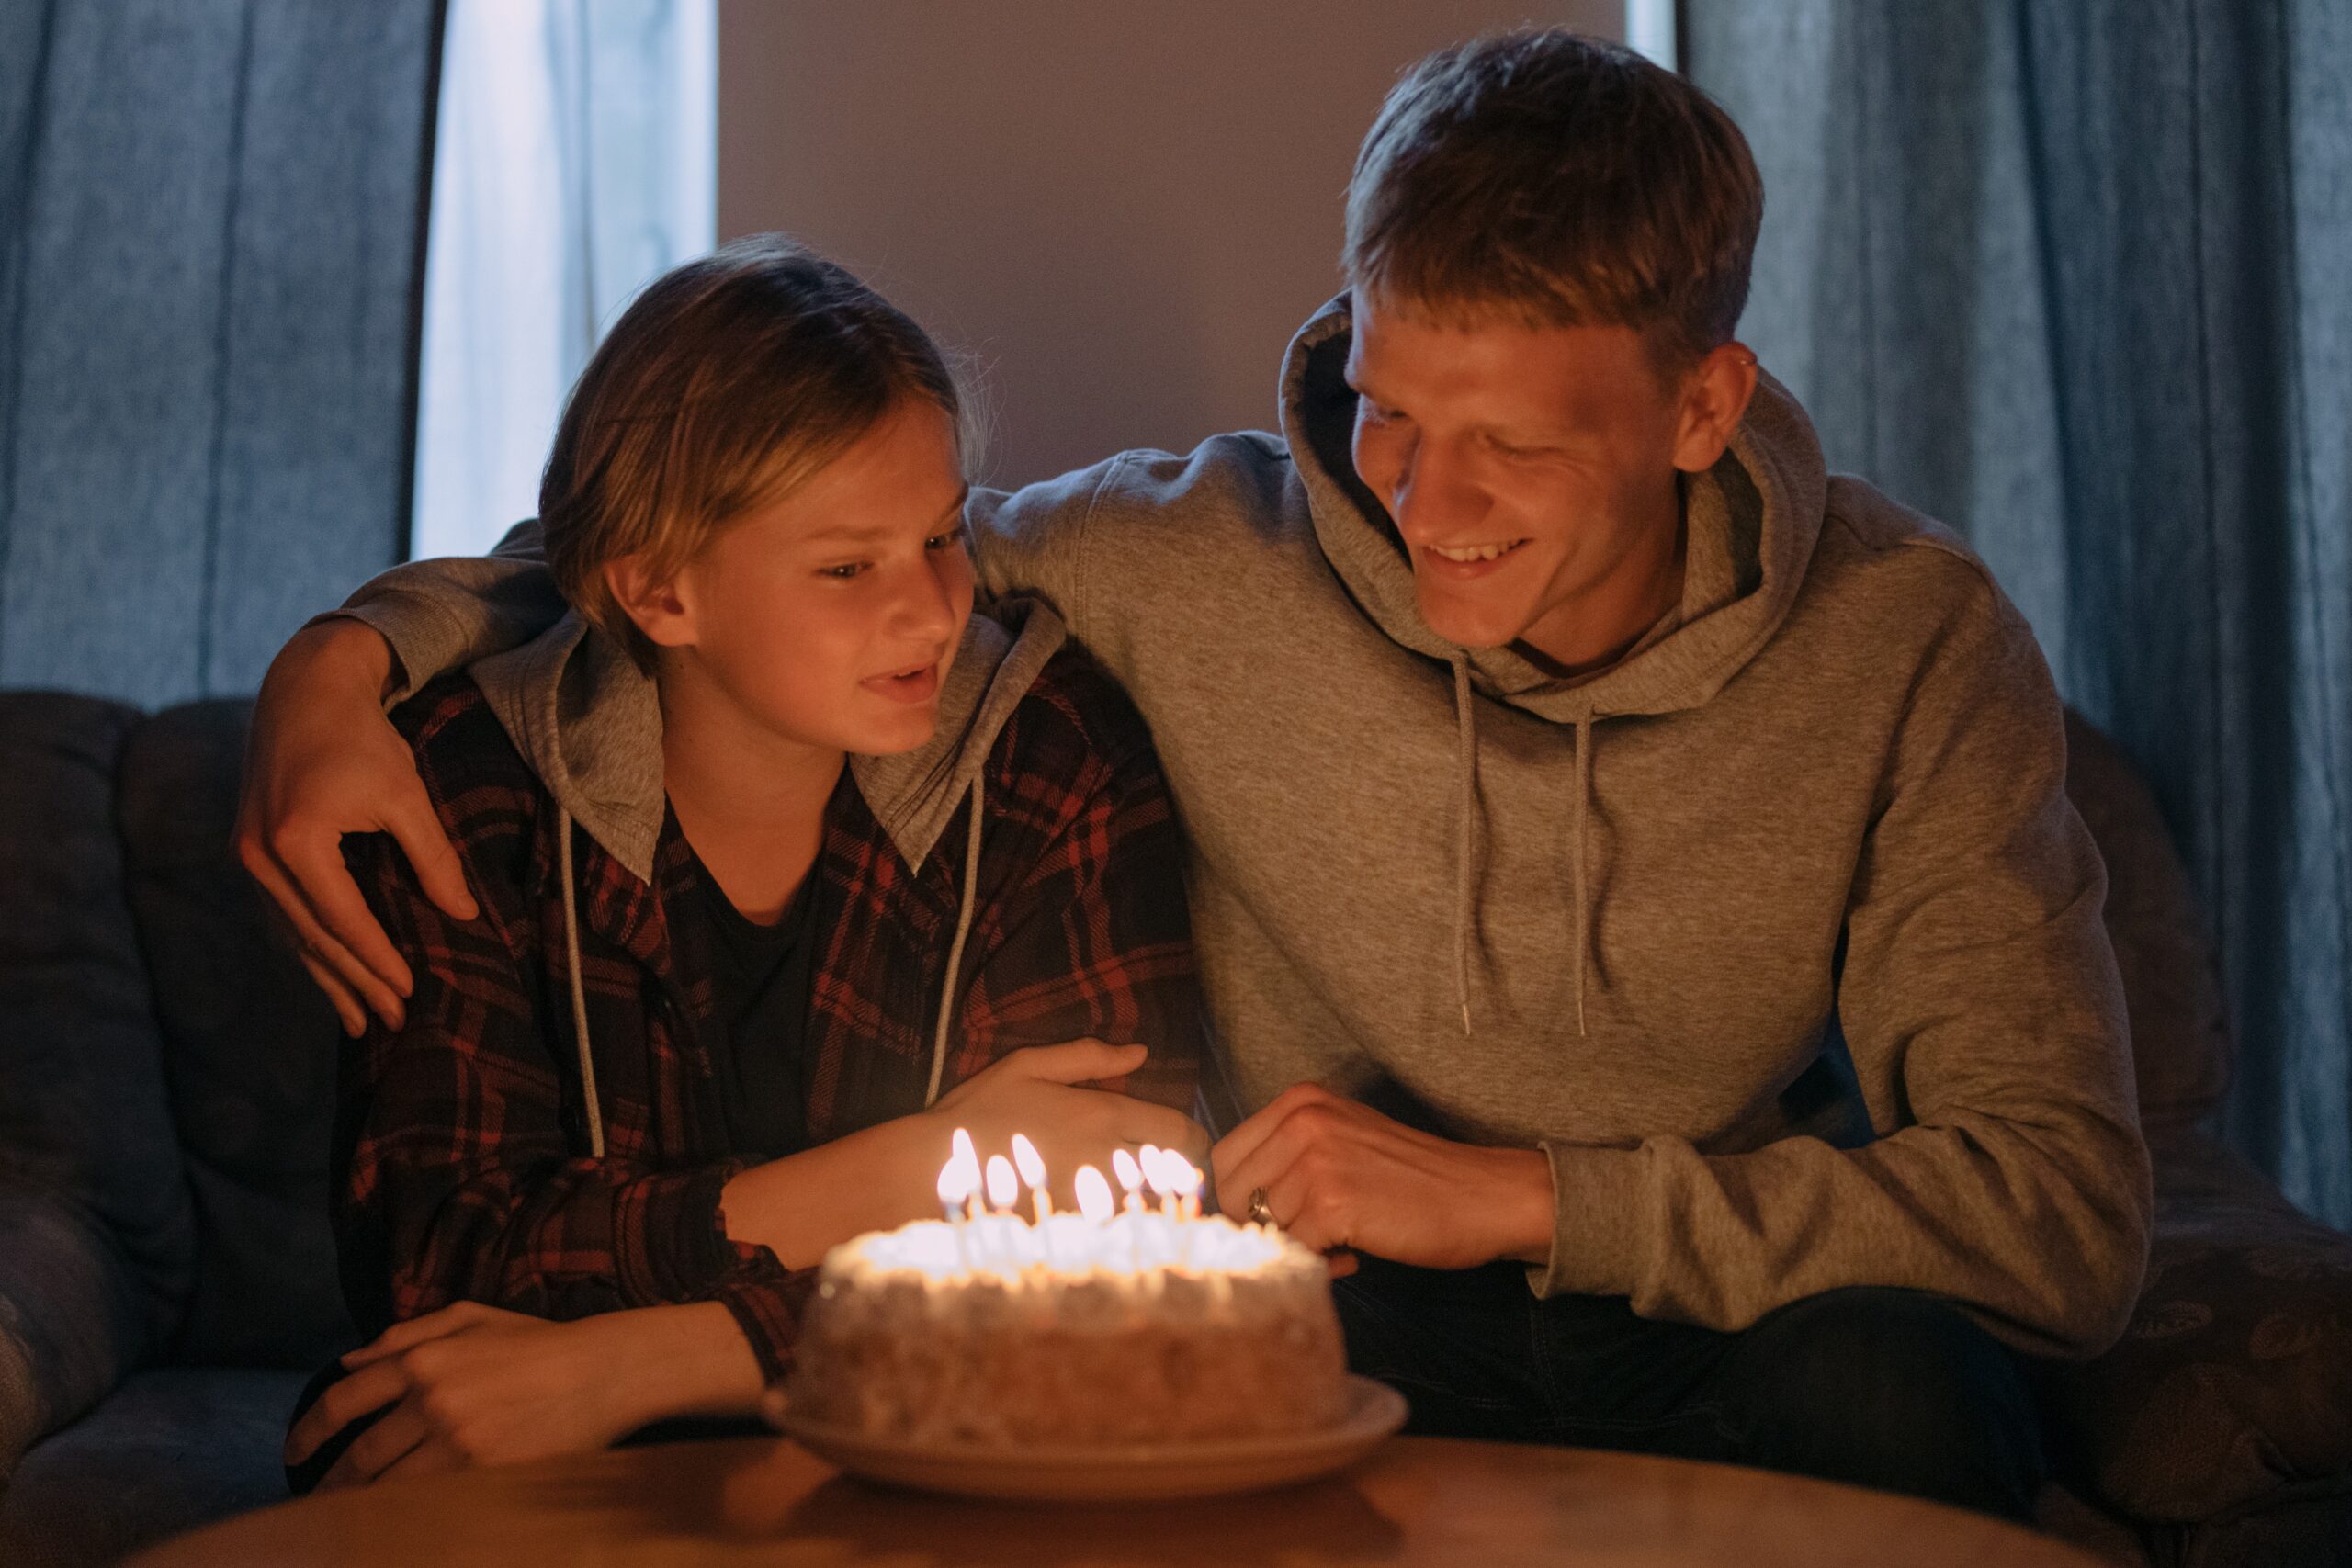 A boy and a man in front of a birthday cake